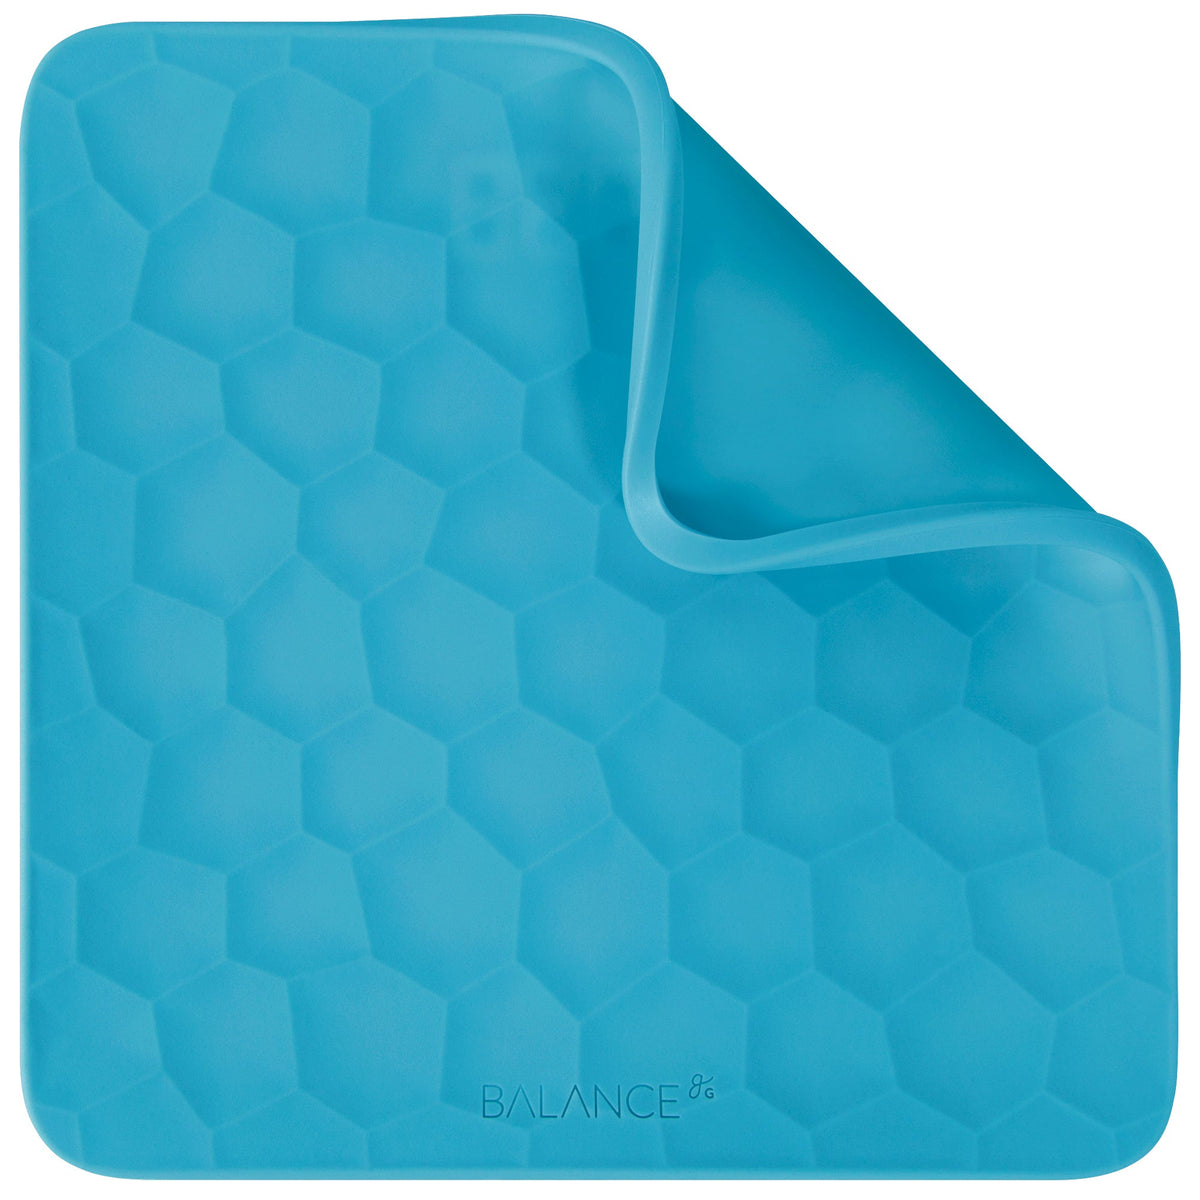 Bathroom Scale with Textured Silicone Cover, Blue